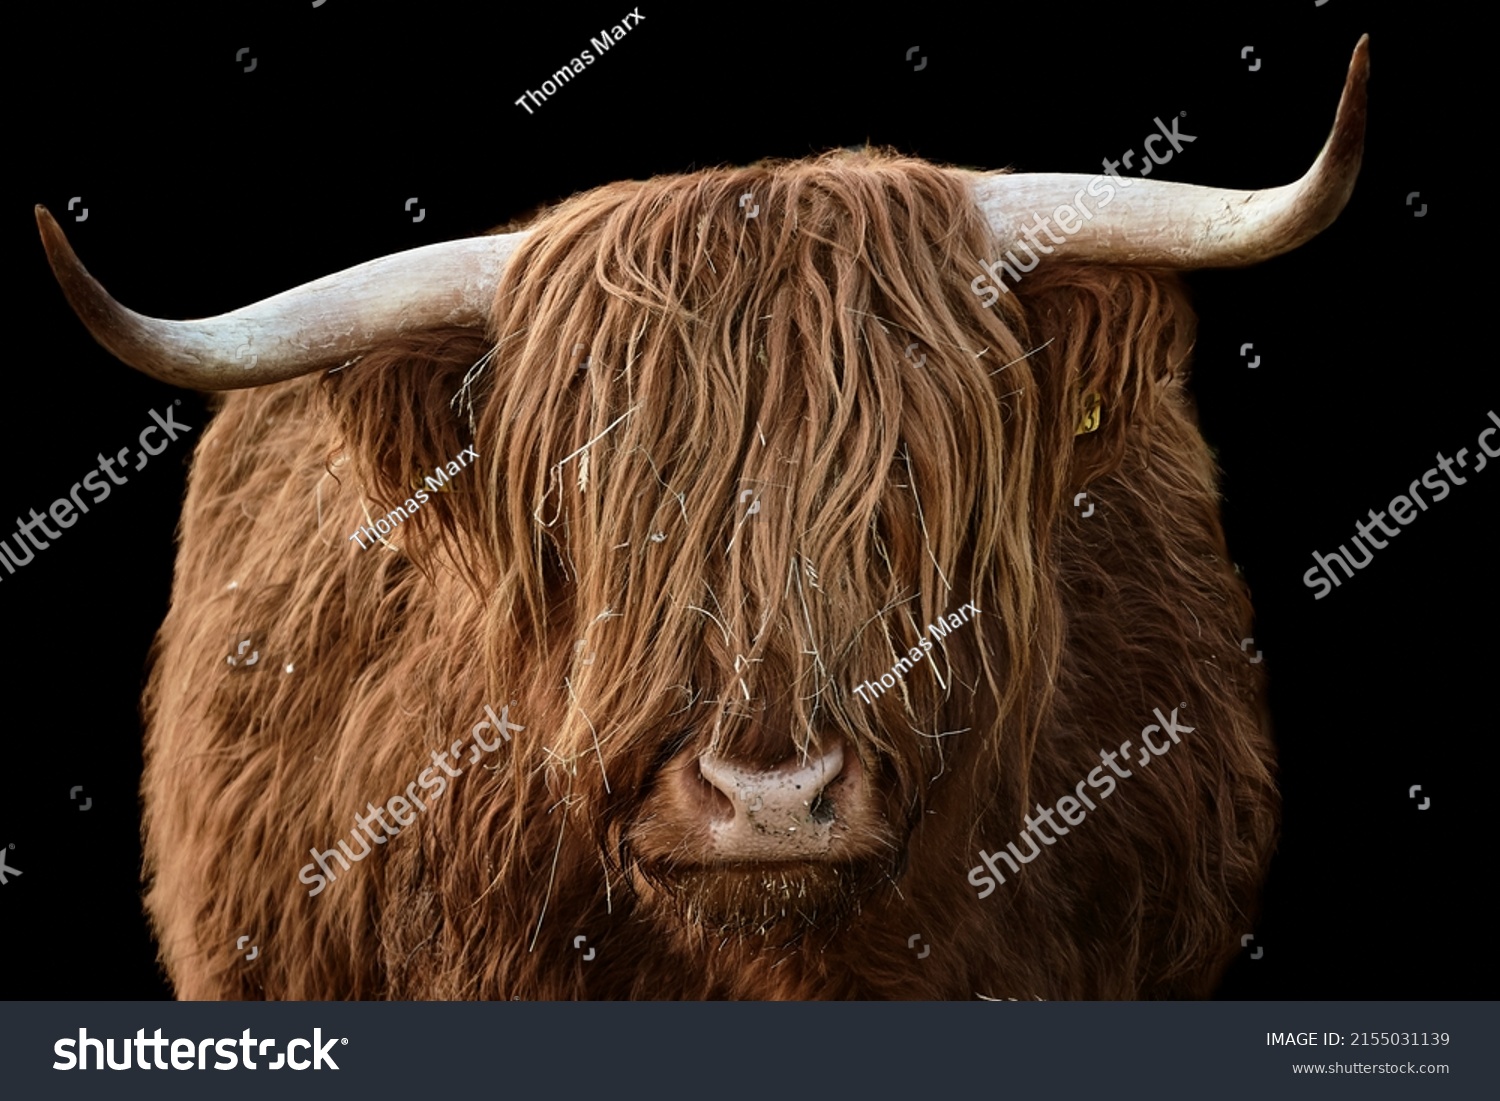 Horned head of a brown Highland Cattle, Bos taurus taurus. Domestic cow looking at camera and isolated on black background. #2155031139